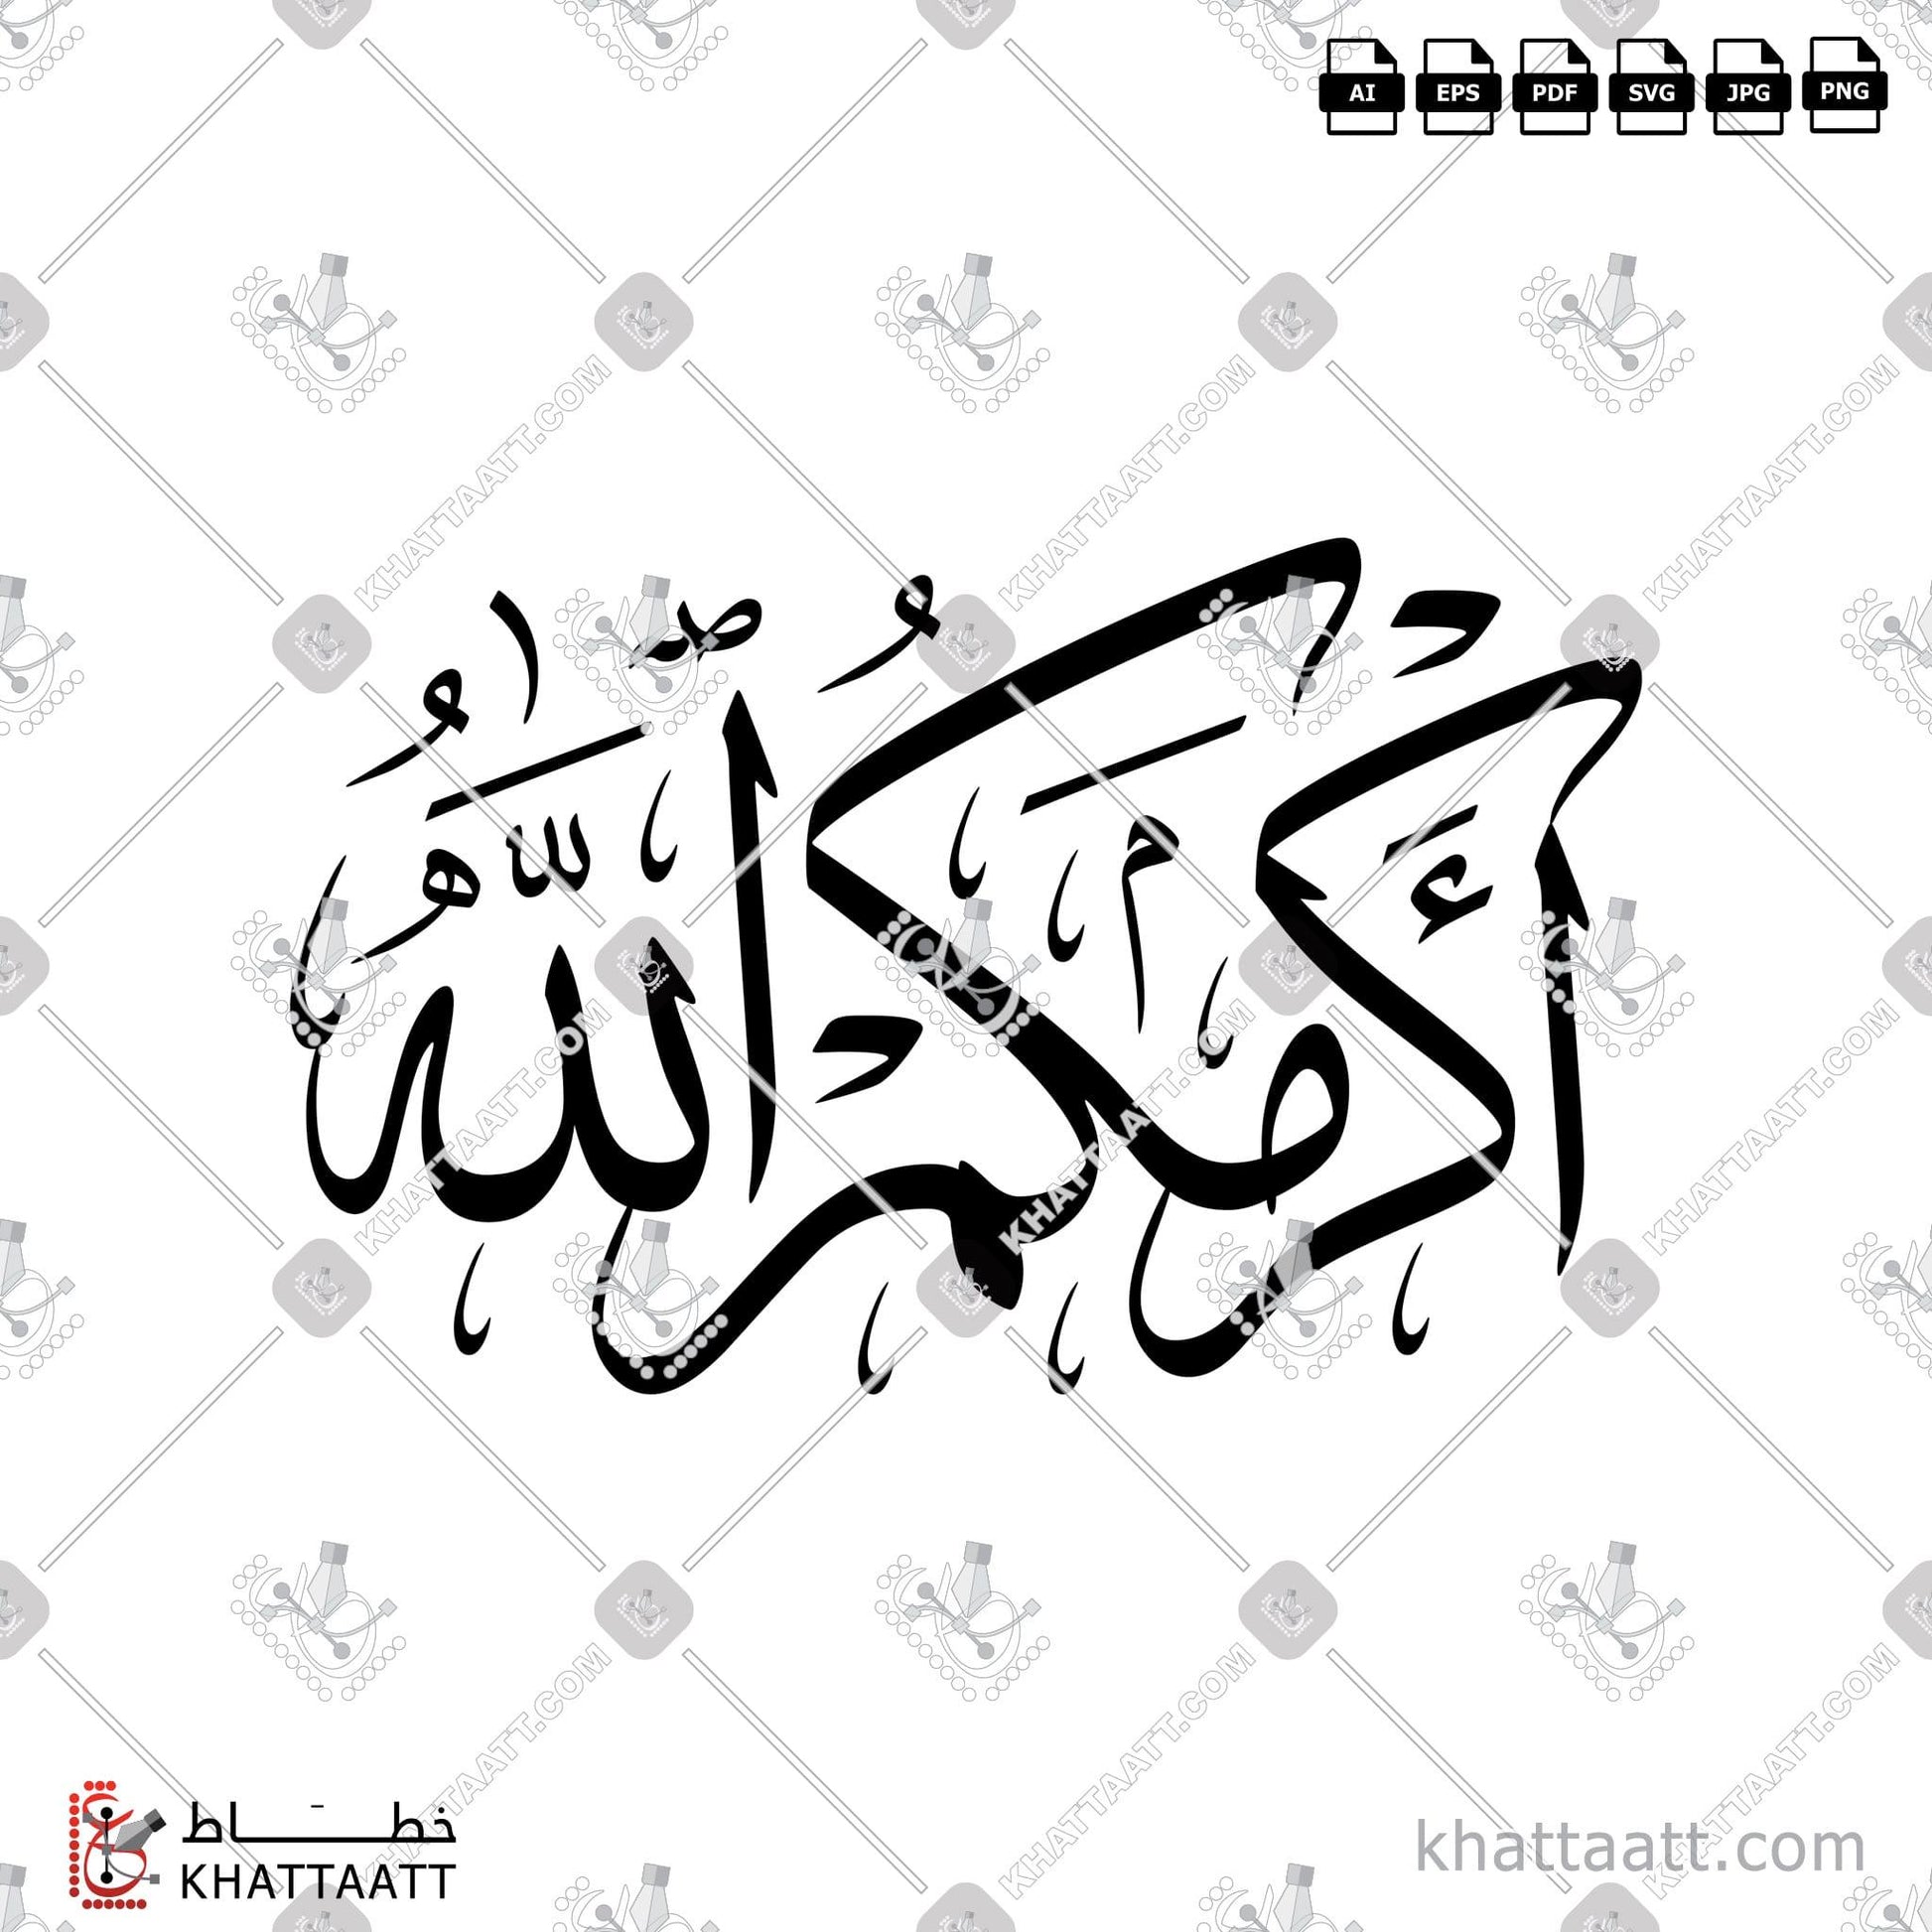 Download Arabic Calligraphy of أكرمكم الله in Thuluth - خط الثلث in vector and .png